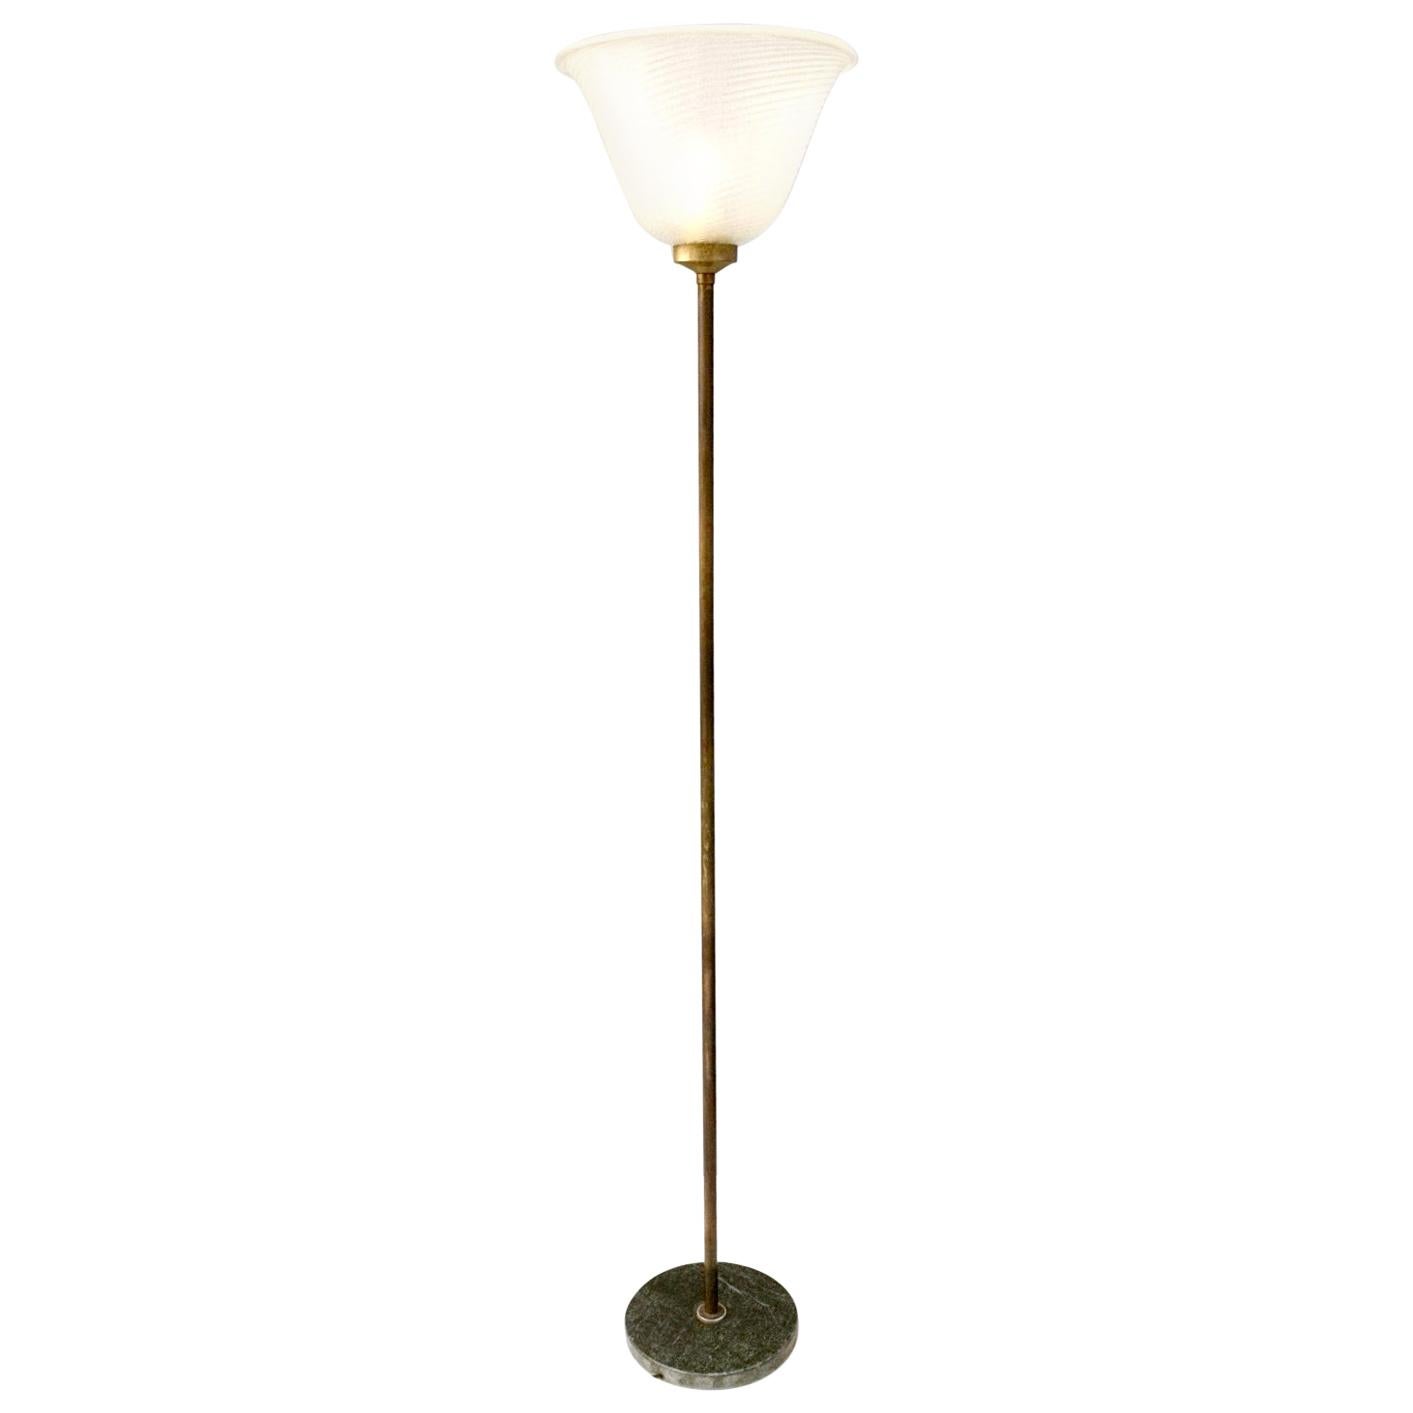 Blown Glass Floor Lamp by Seguso with a Green Alps Marble Base, Italy